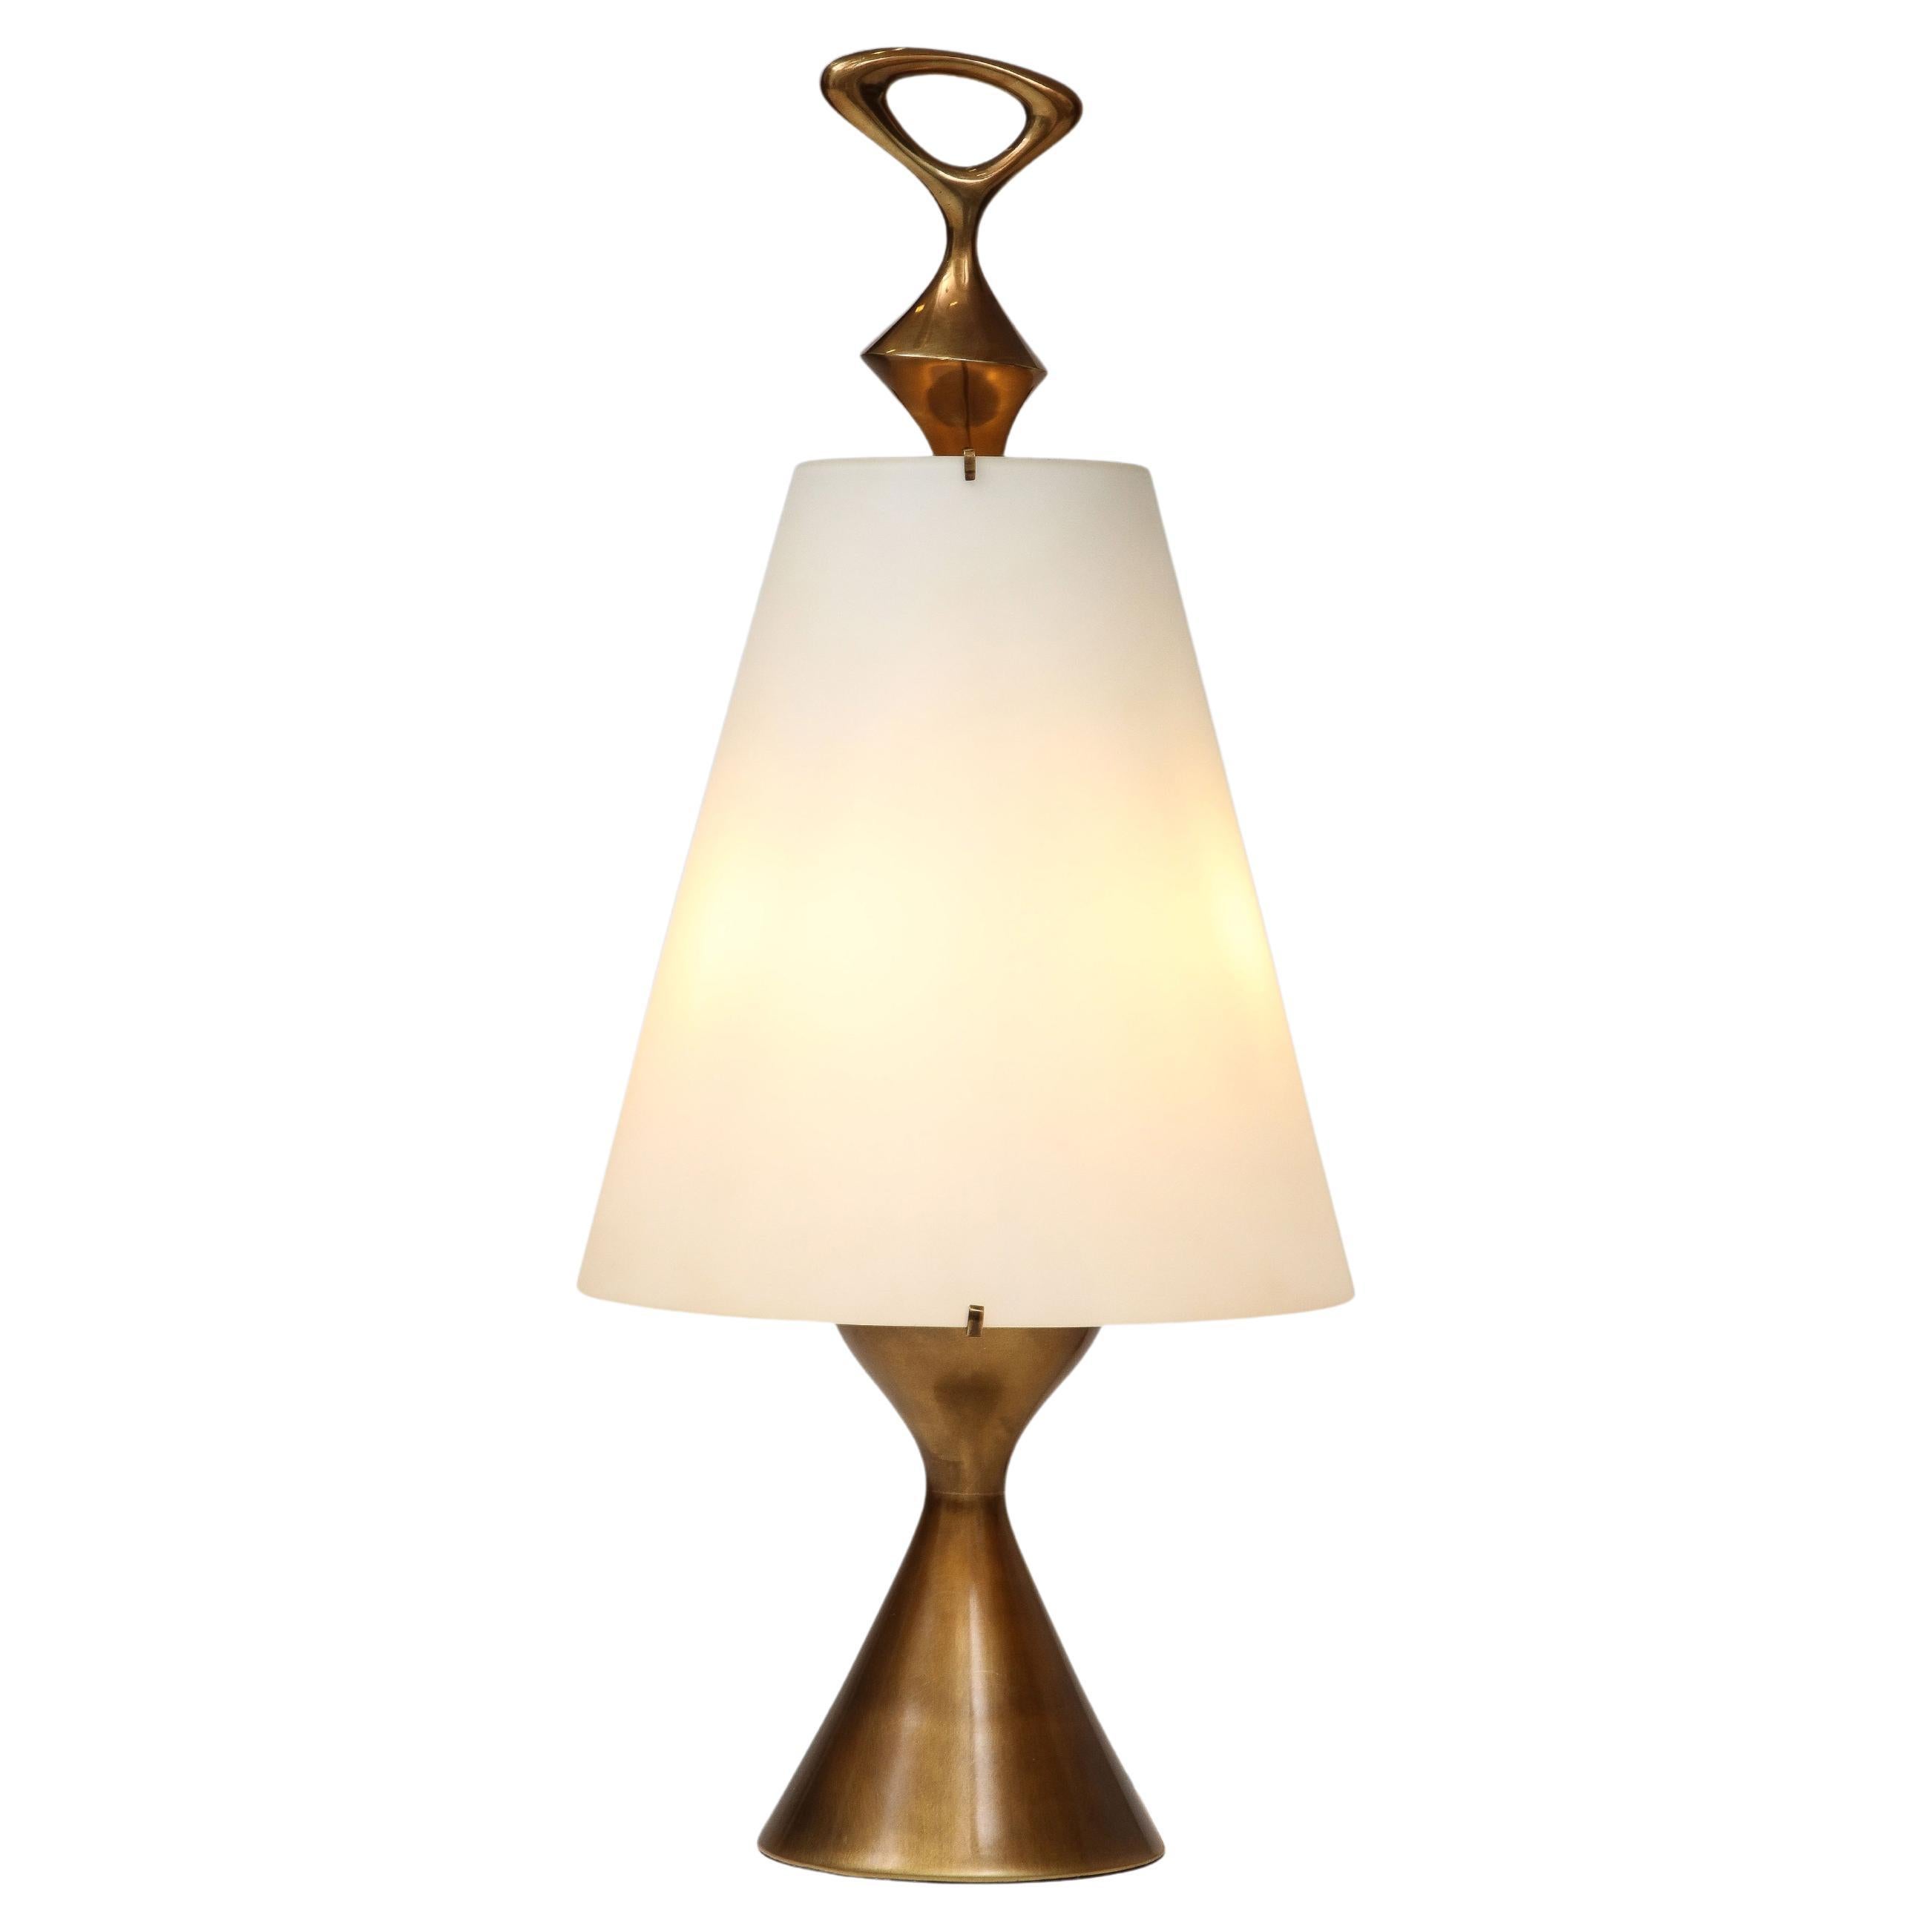 Max Ingrand for Fontana Arte Rare Table Lamp in Opaline Glass and Gilt Brass